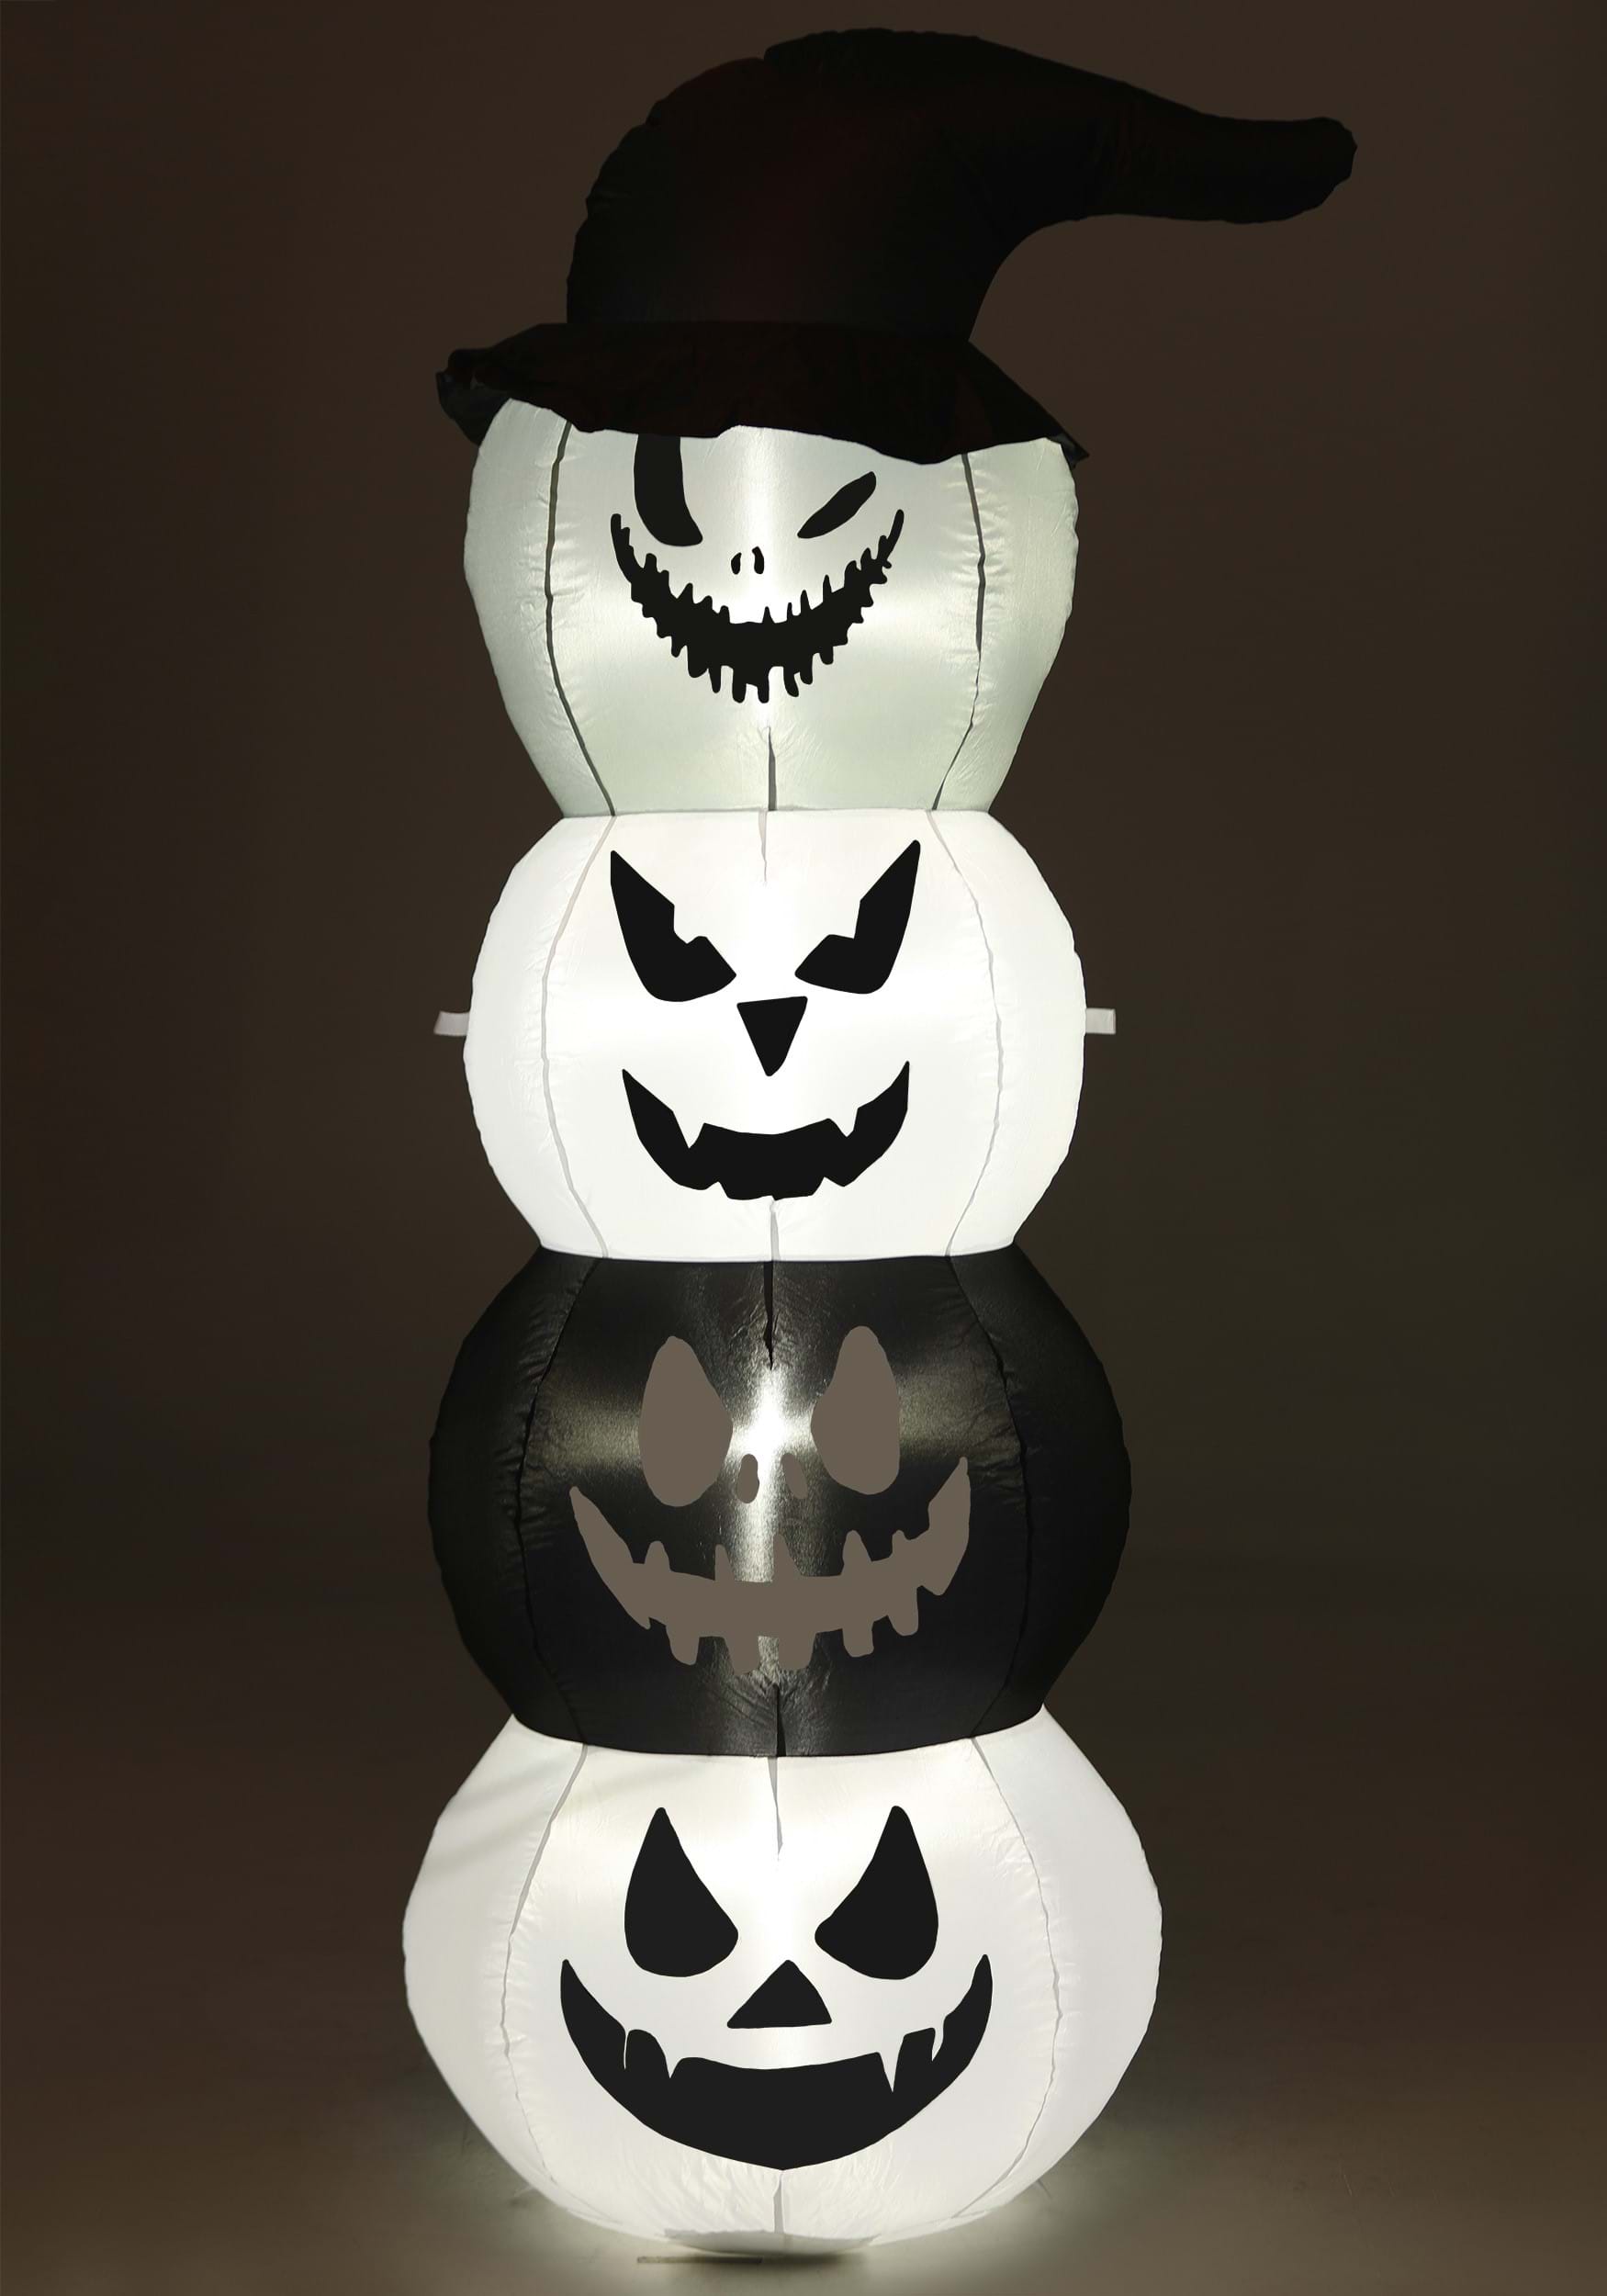 5FT White & Black Stacked Jack O Lantern Inflatable Halloween Prop , Inflatable Decorations